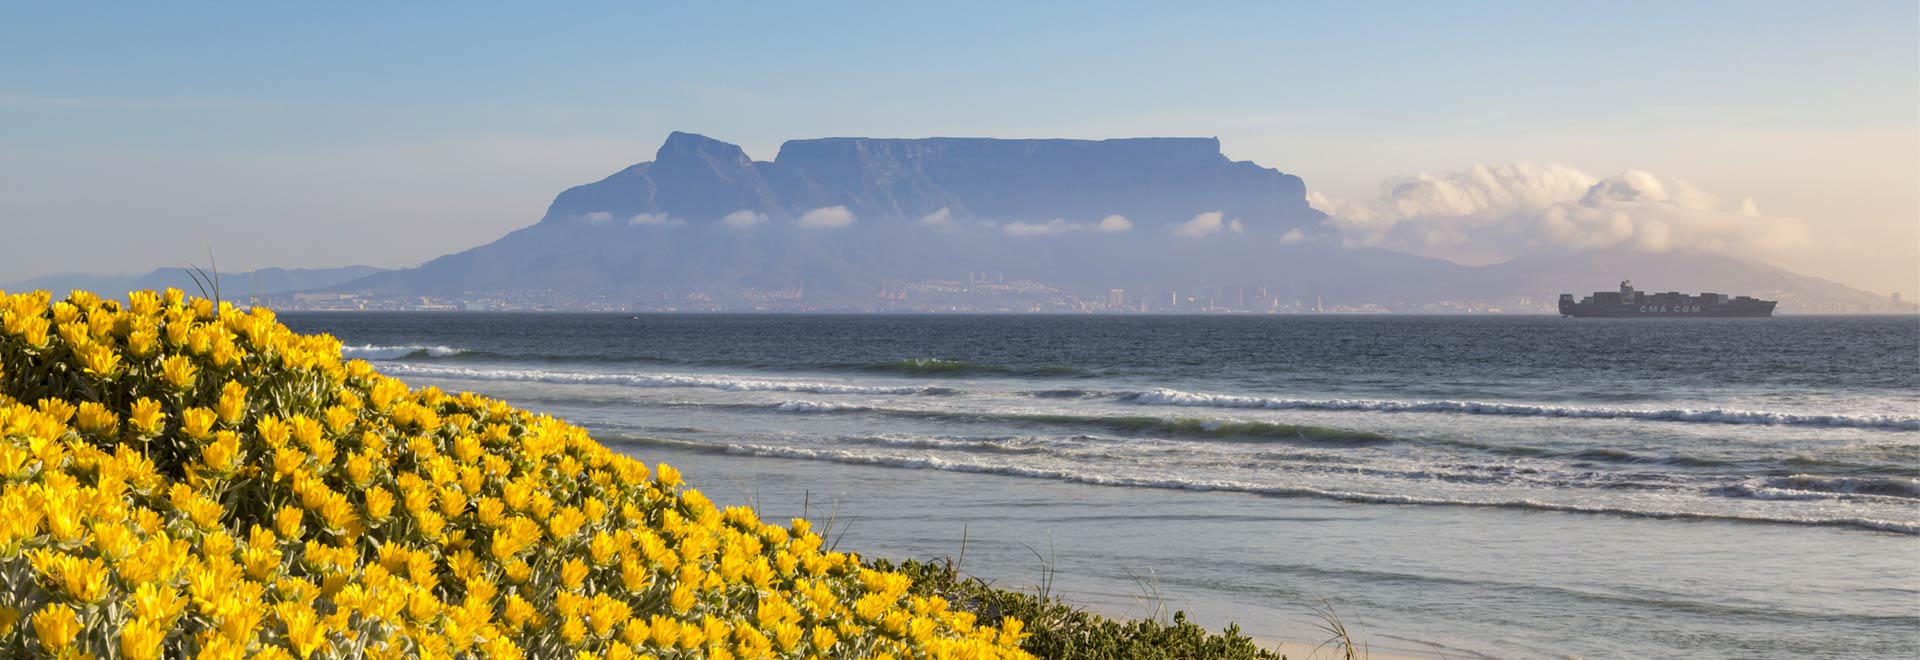 Southern-Africa-South-Africa-Cape-Town-Floral-Coast